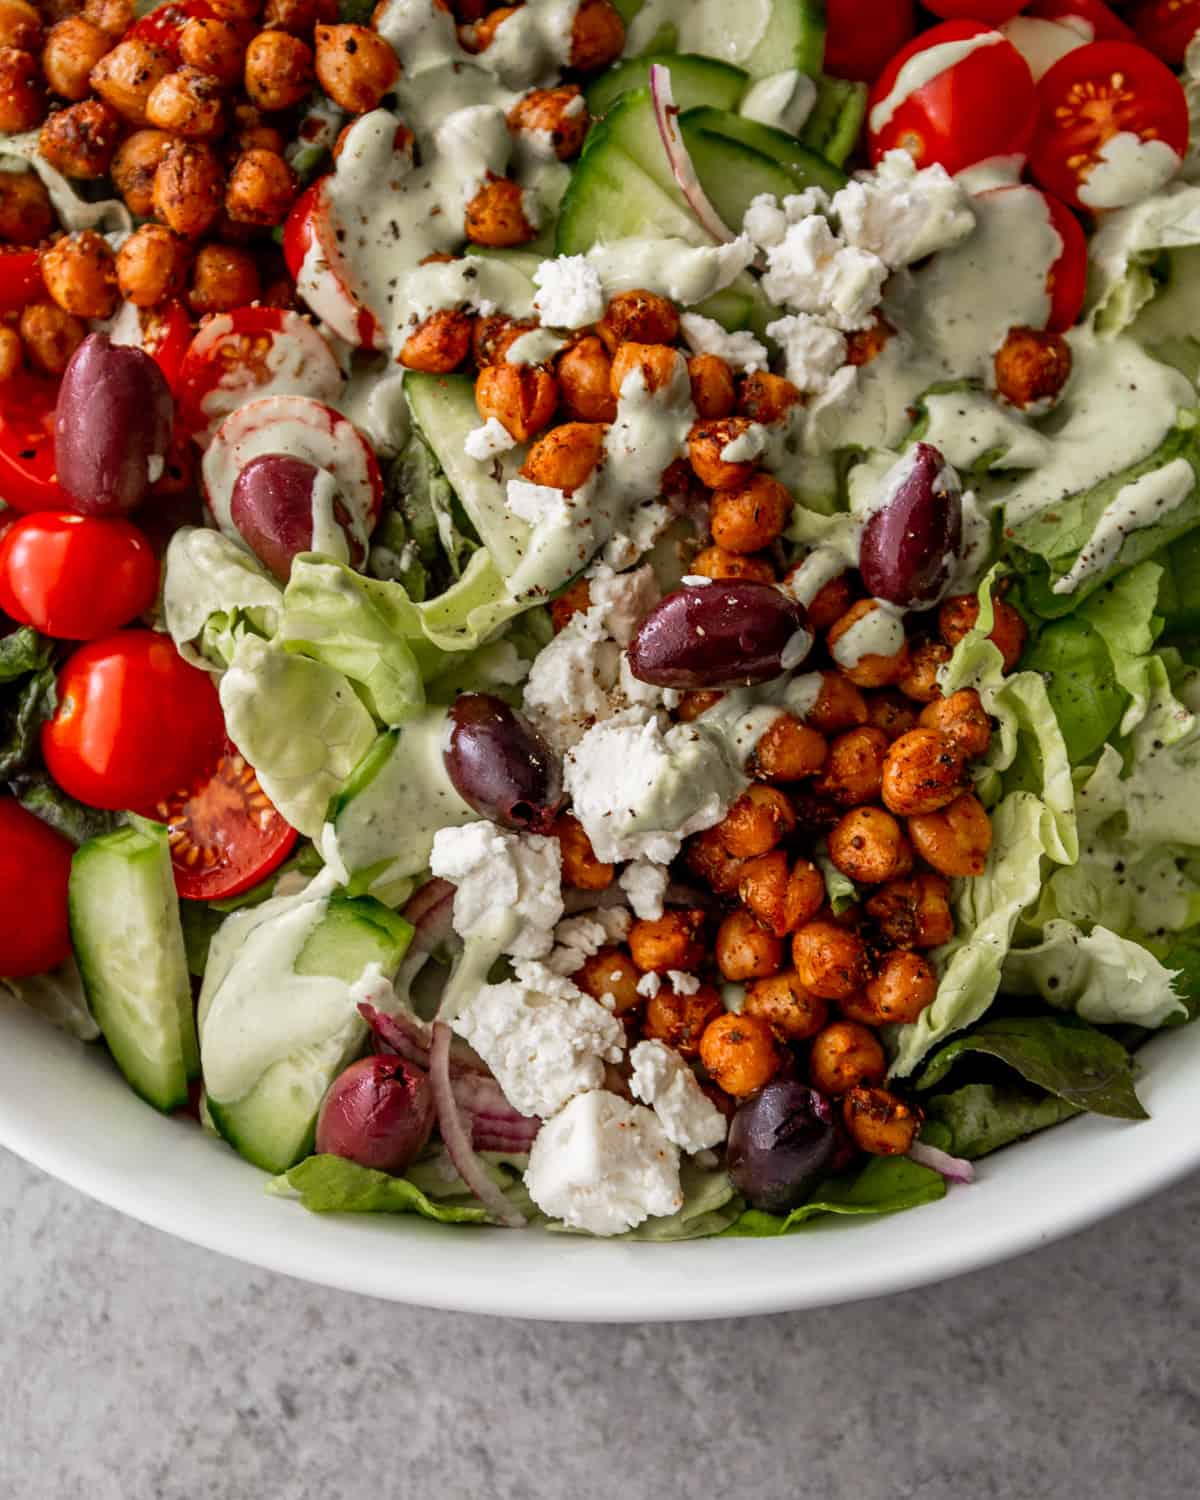 close up image of salad with olives, chickpeas, and dressing